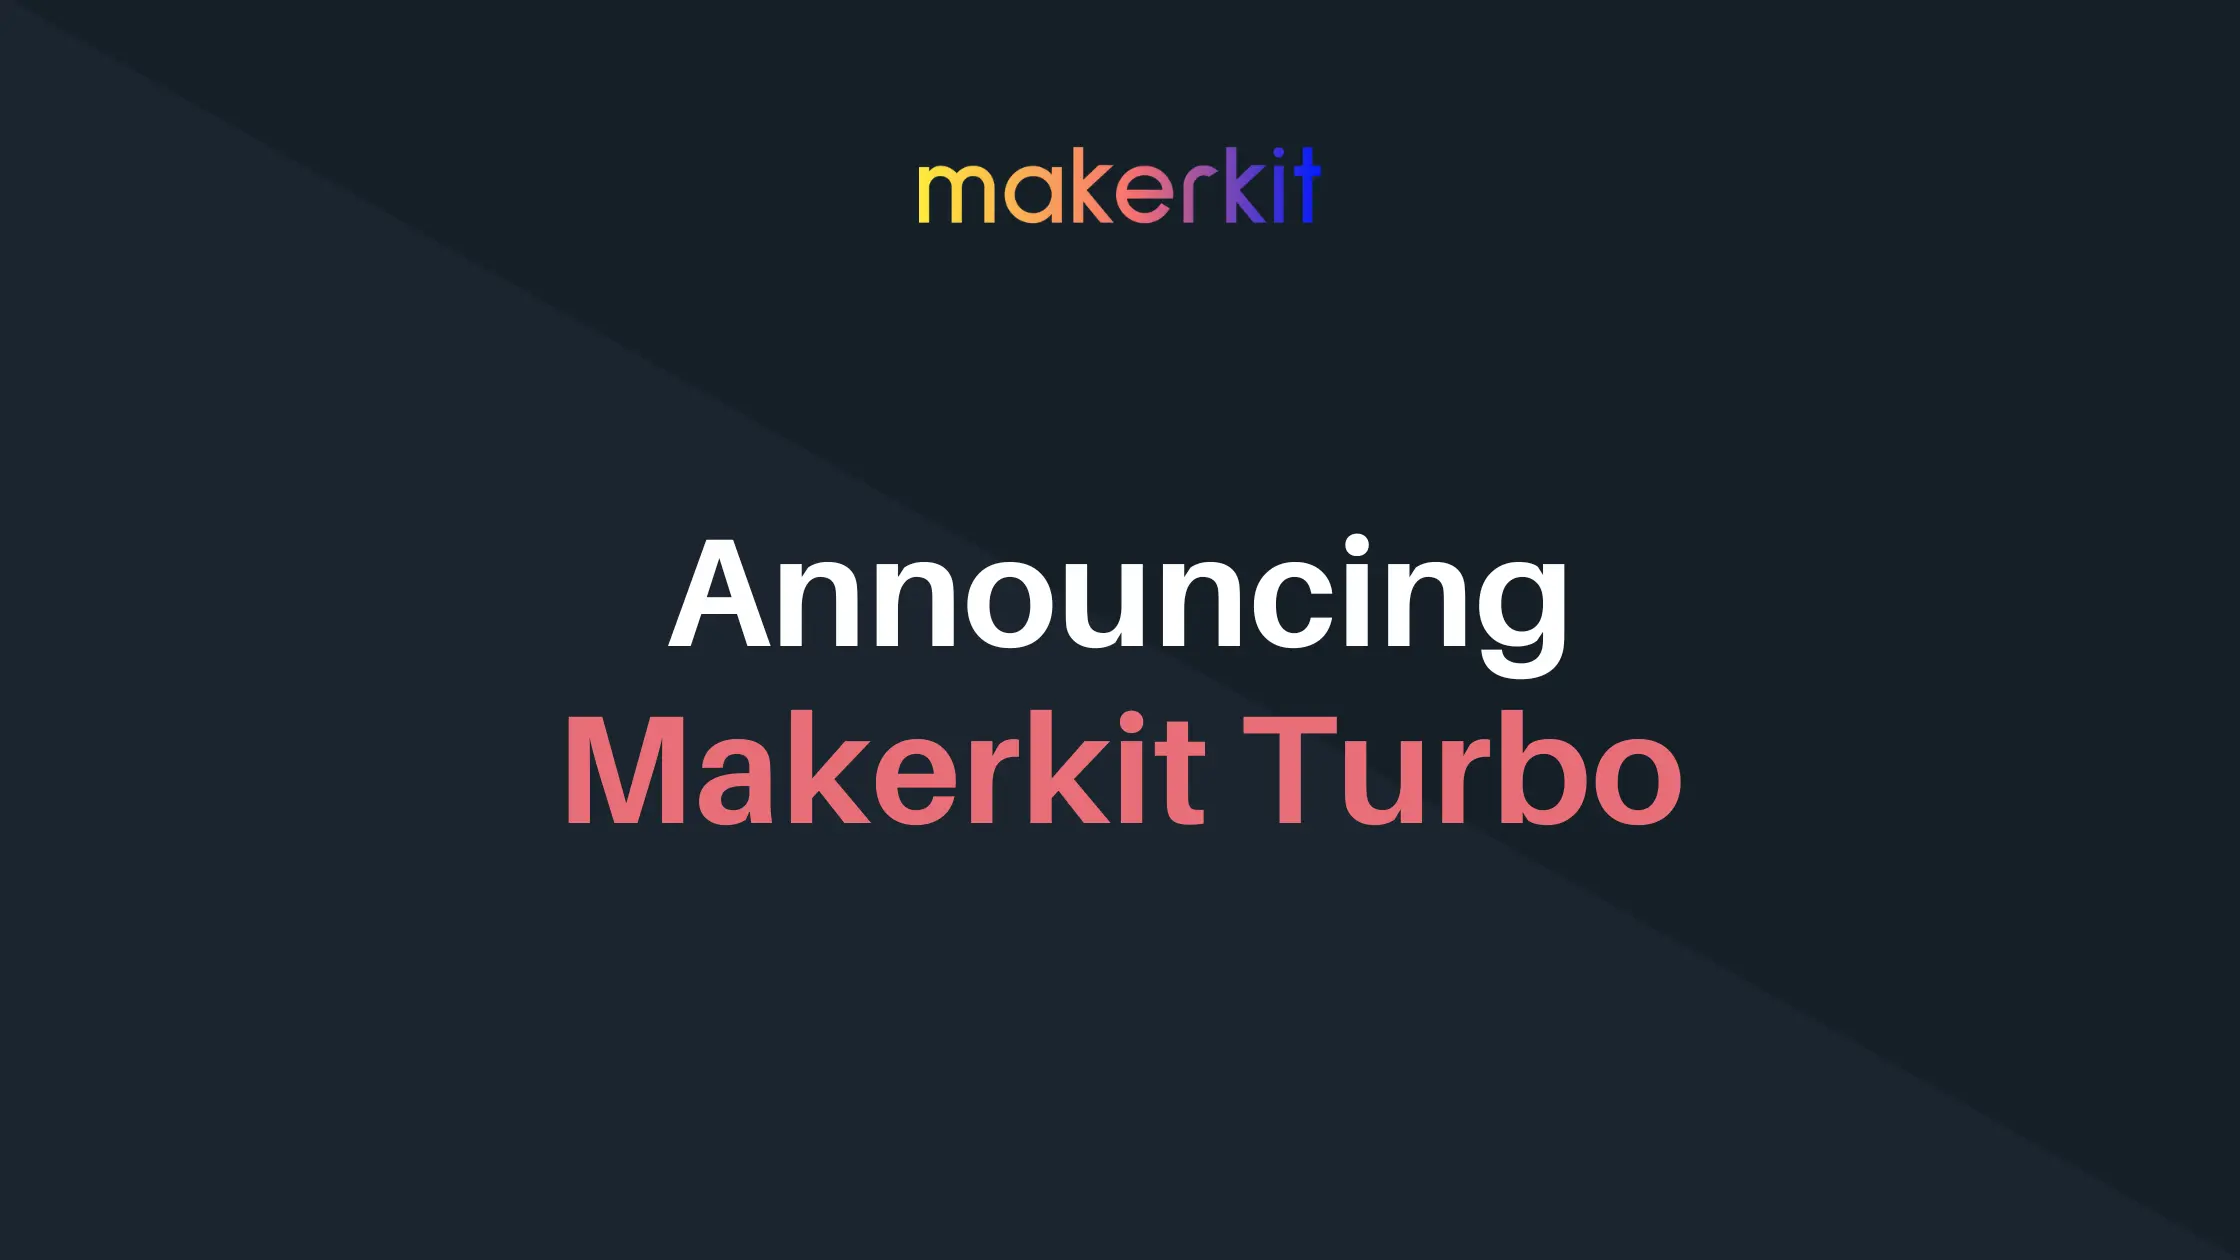 Cover Image for Introducing Makerkit Turbo: faster, simpler and more powerful SaaS Boilerplate